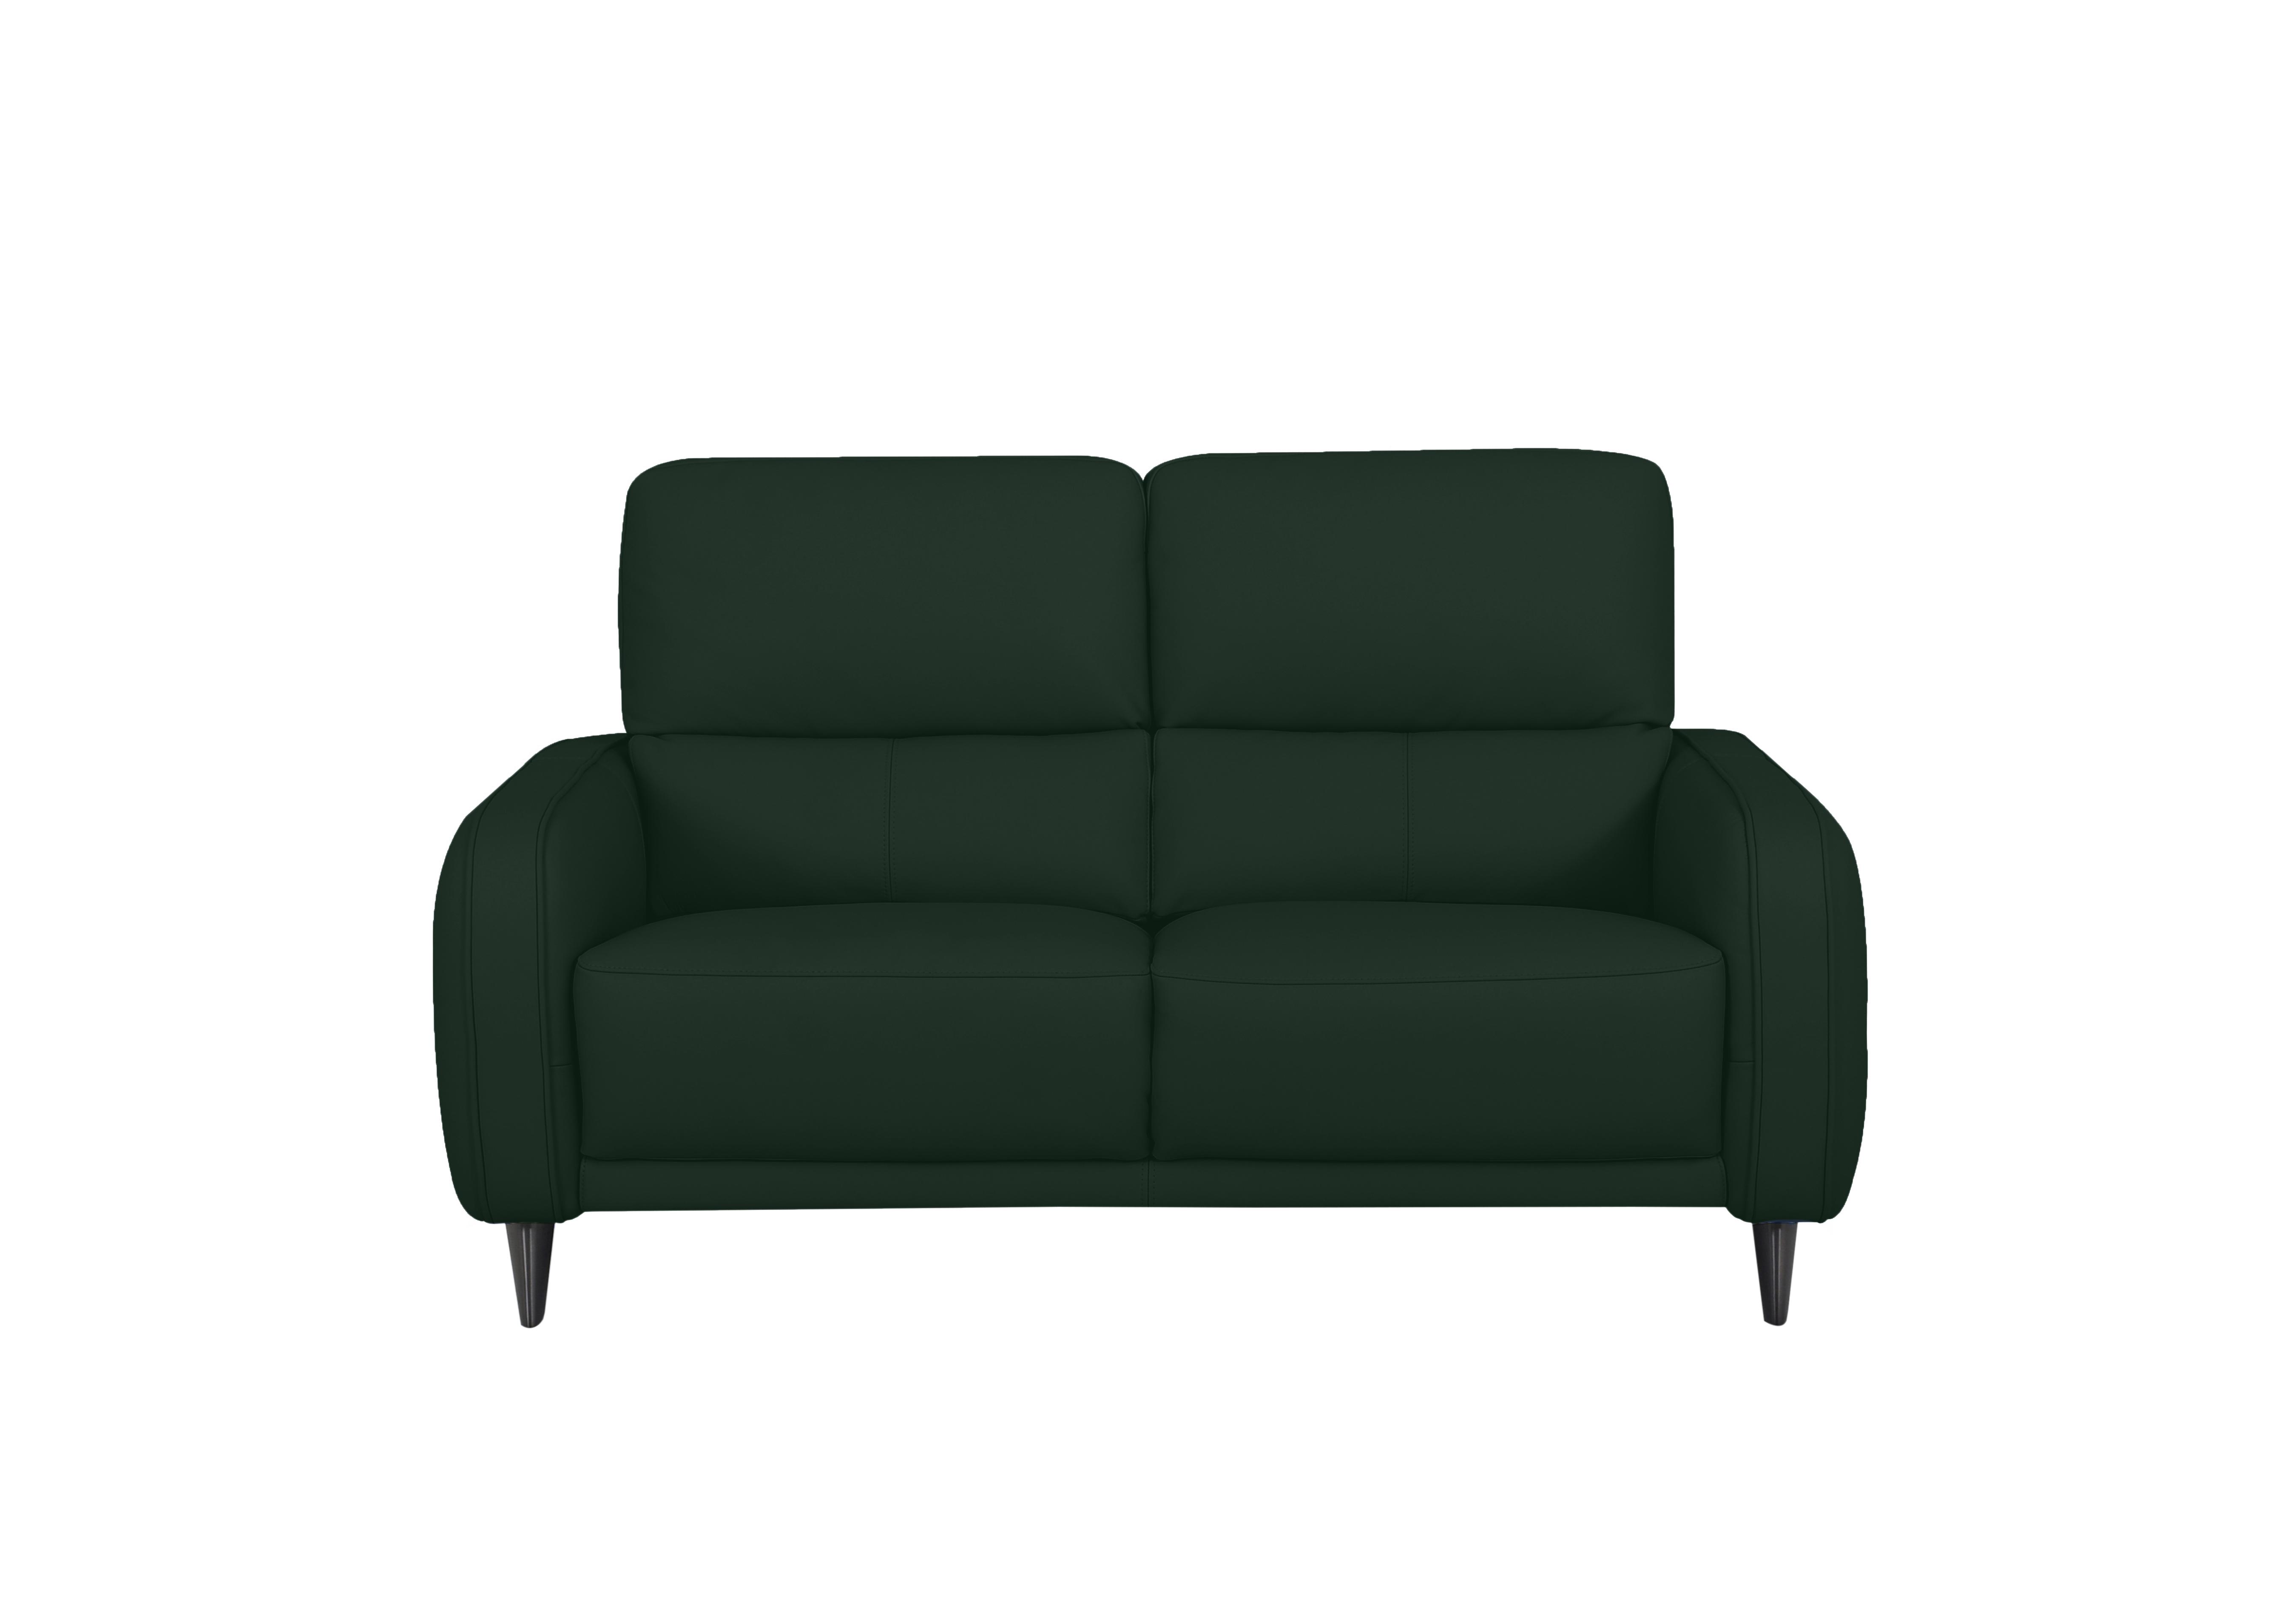 Logan 2.5 Seater Leather Sofa in Np-603e Dark Forest on Furniture Village